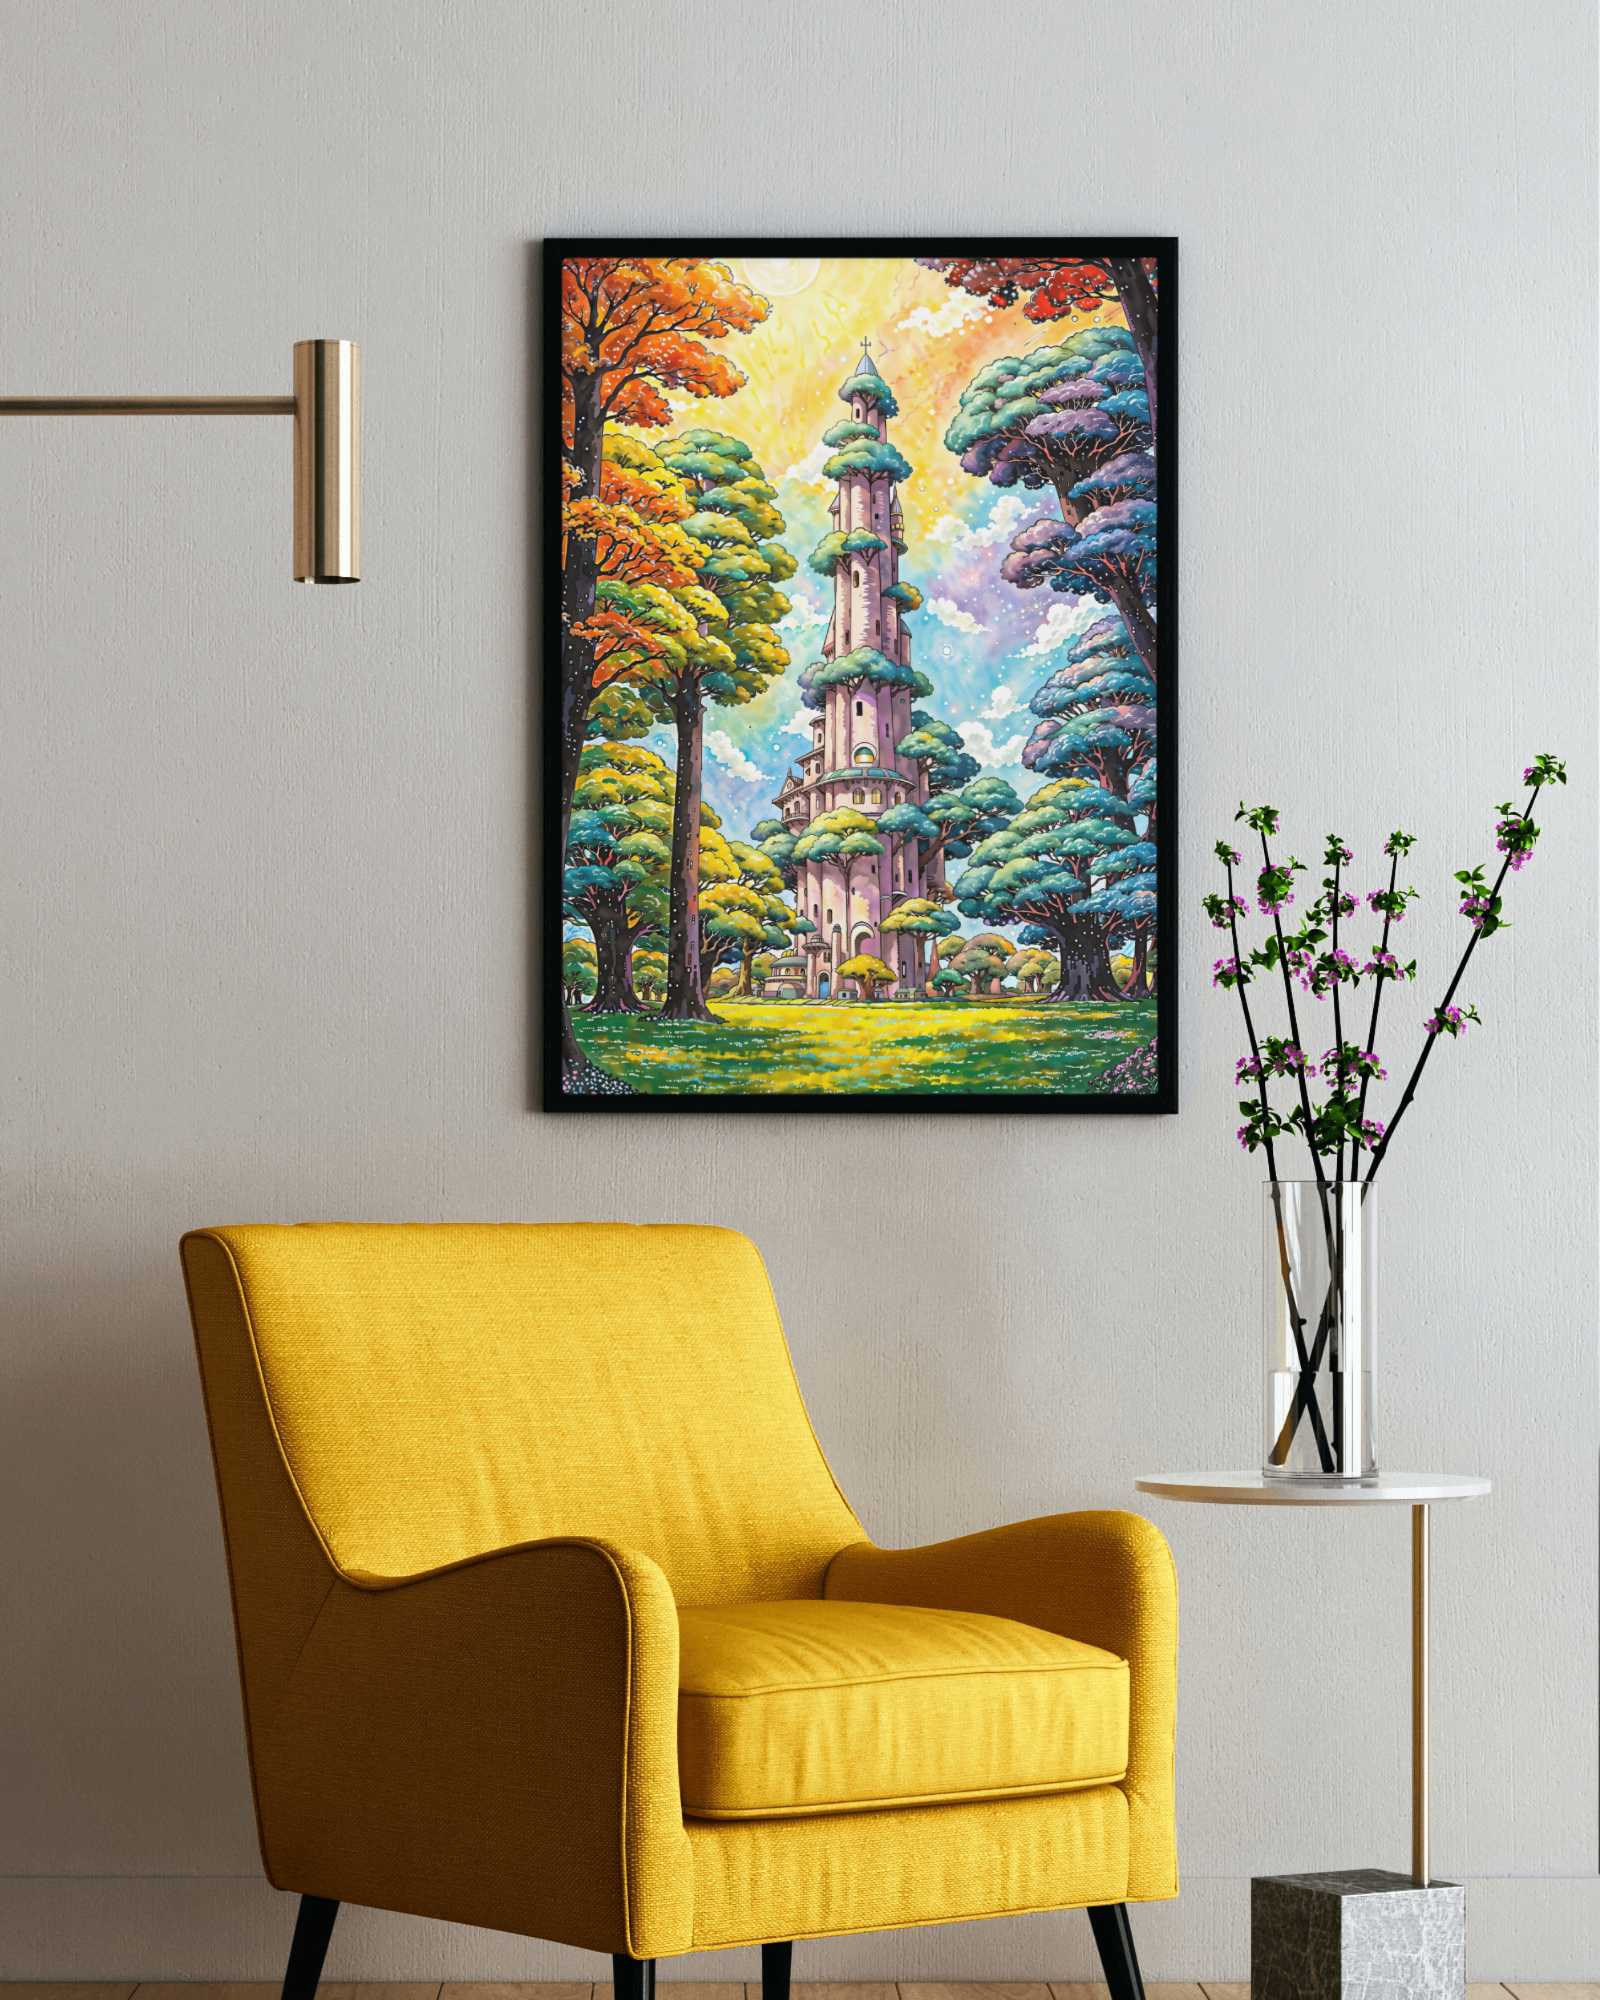 Autumn wizard's tower - Poster - Ever colorful